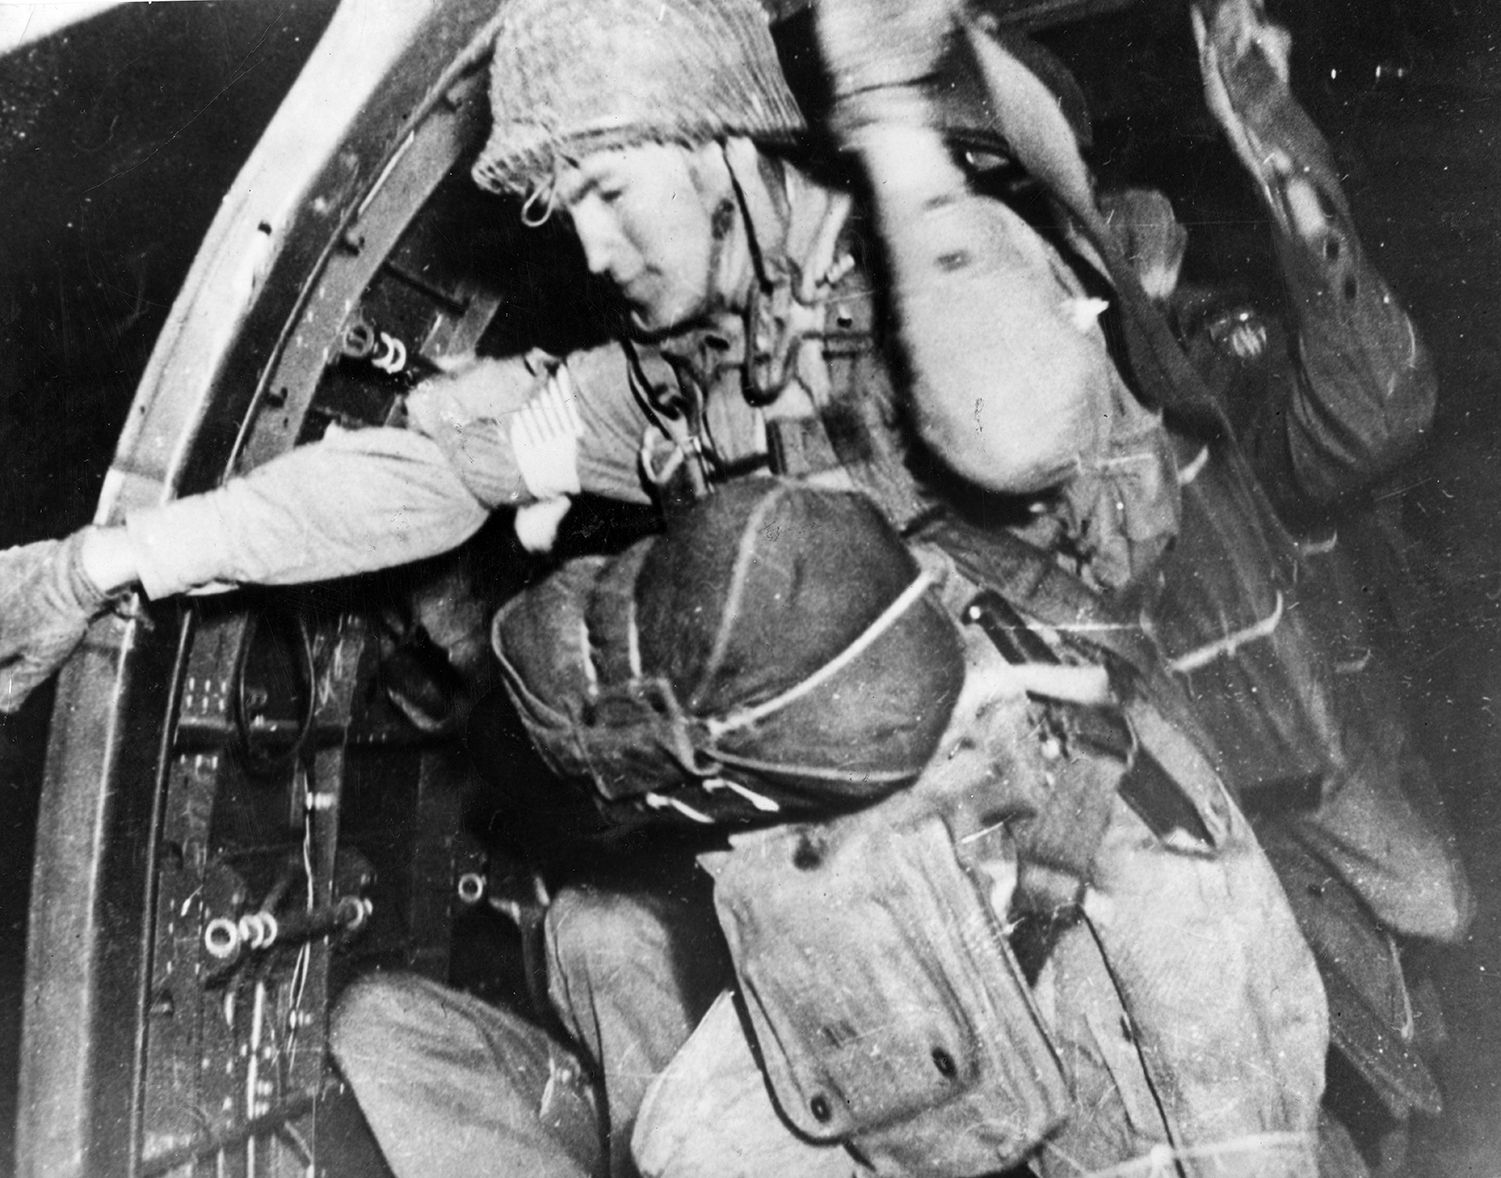 Men of the 505th Parachute Infantry Regiment, 82nd Airborne Division, begin bailing out of their transport plane. The paratroopers were to have played a key role in the invasion, but many were mis-dropped or killed by friendly fire. 